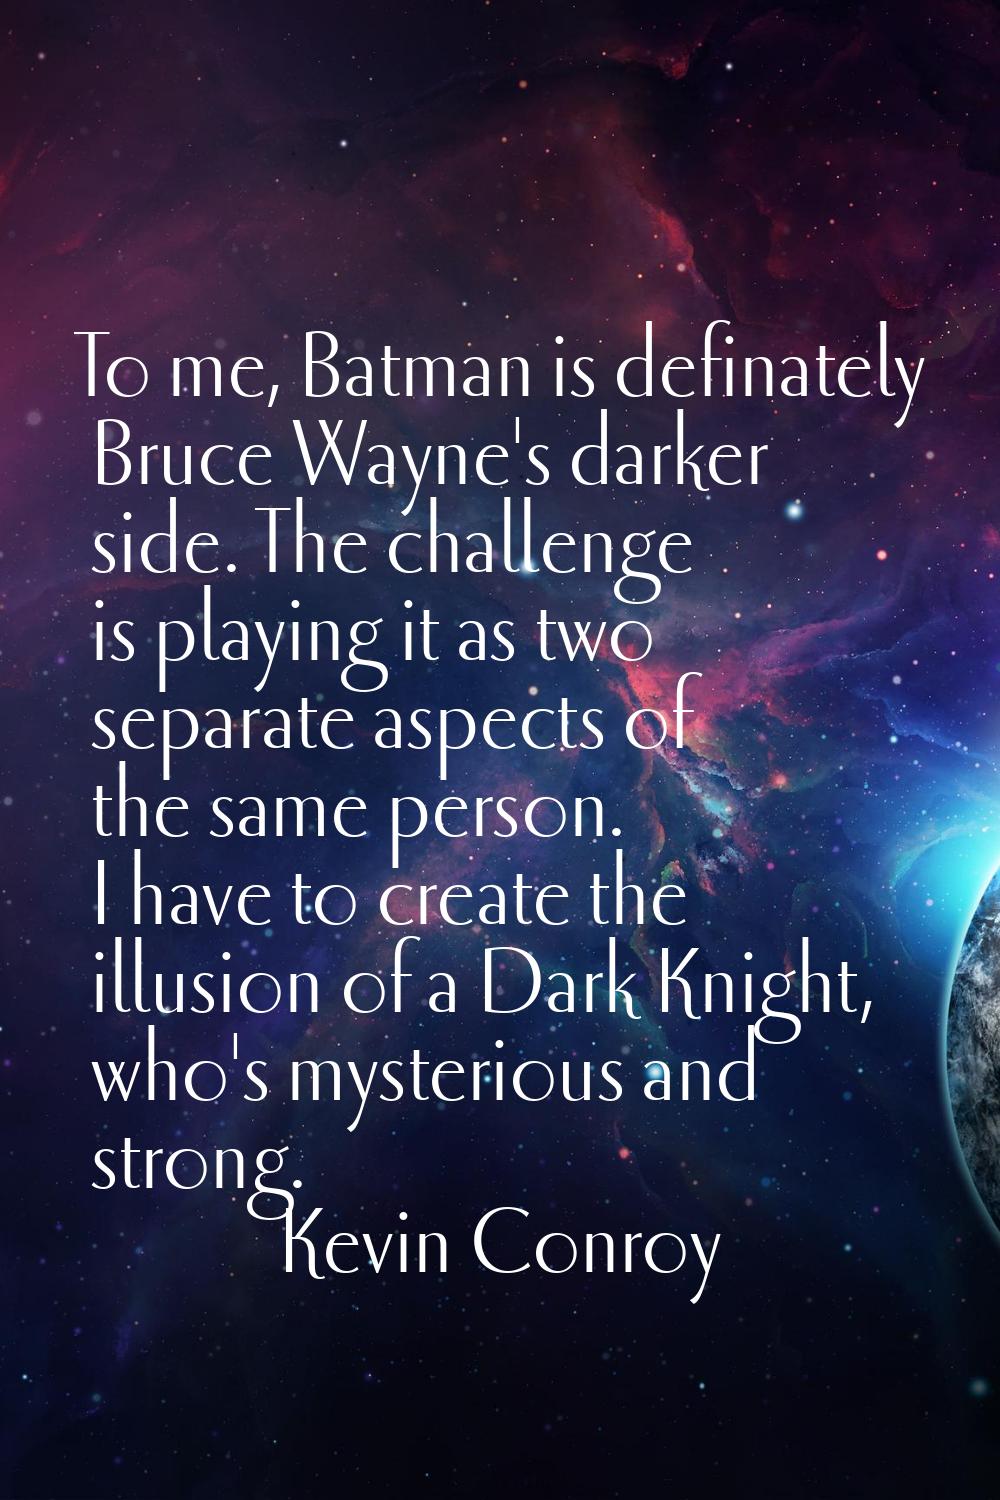 To me, Batman is definately Bruce Wayne's darker side. The challenge is playing it as two separate 